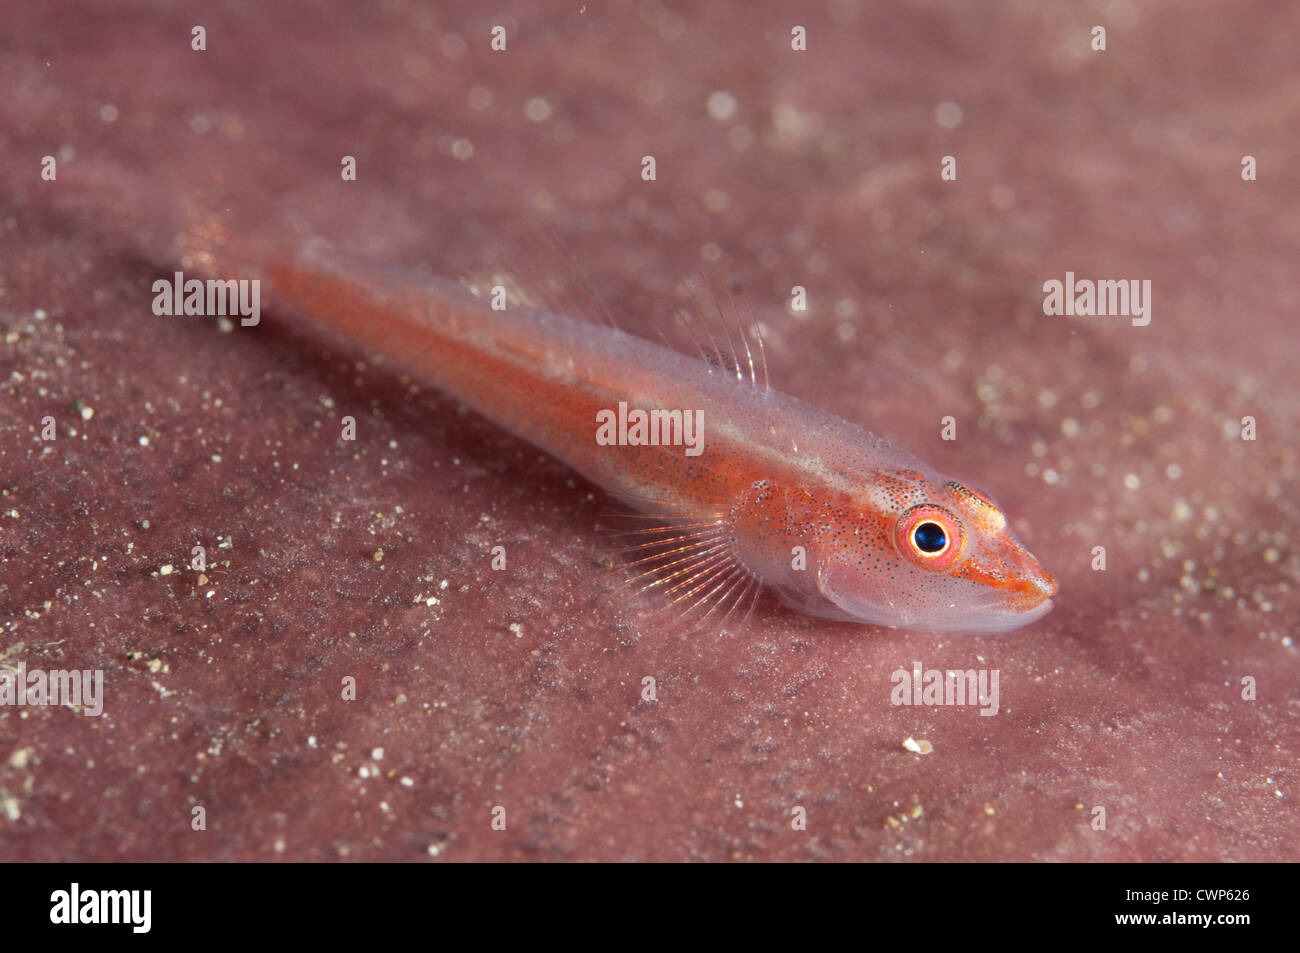 Whipcoral Dwarf Goby (Bryaninops youngei) adult, Batanta Island, Raja Ampat Islands (Four Kings), West Papua, New Guinea, Stock Photo